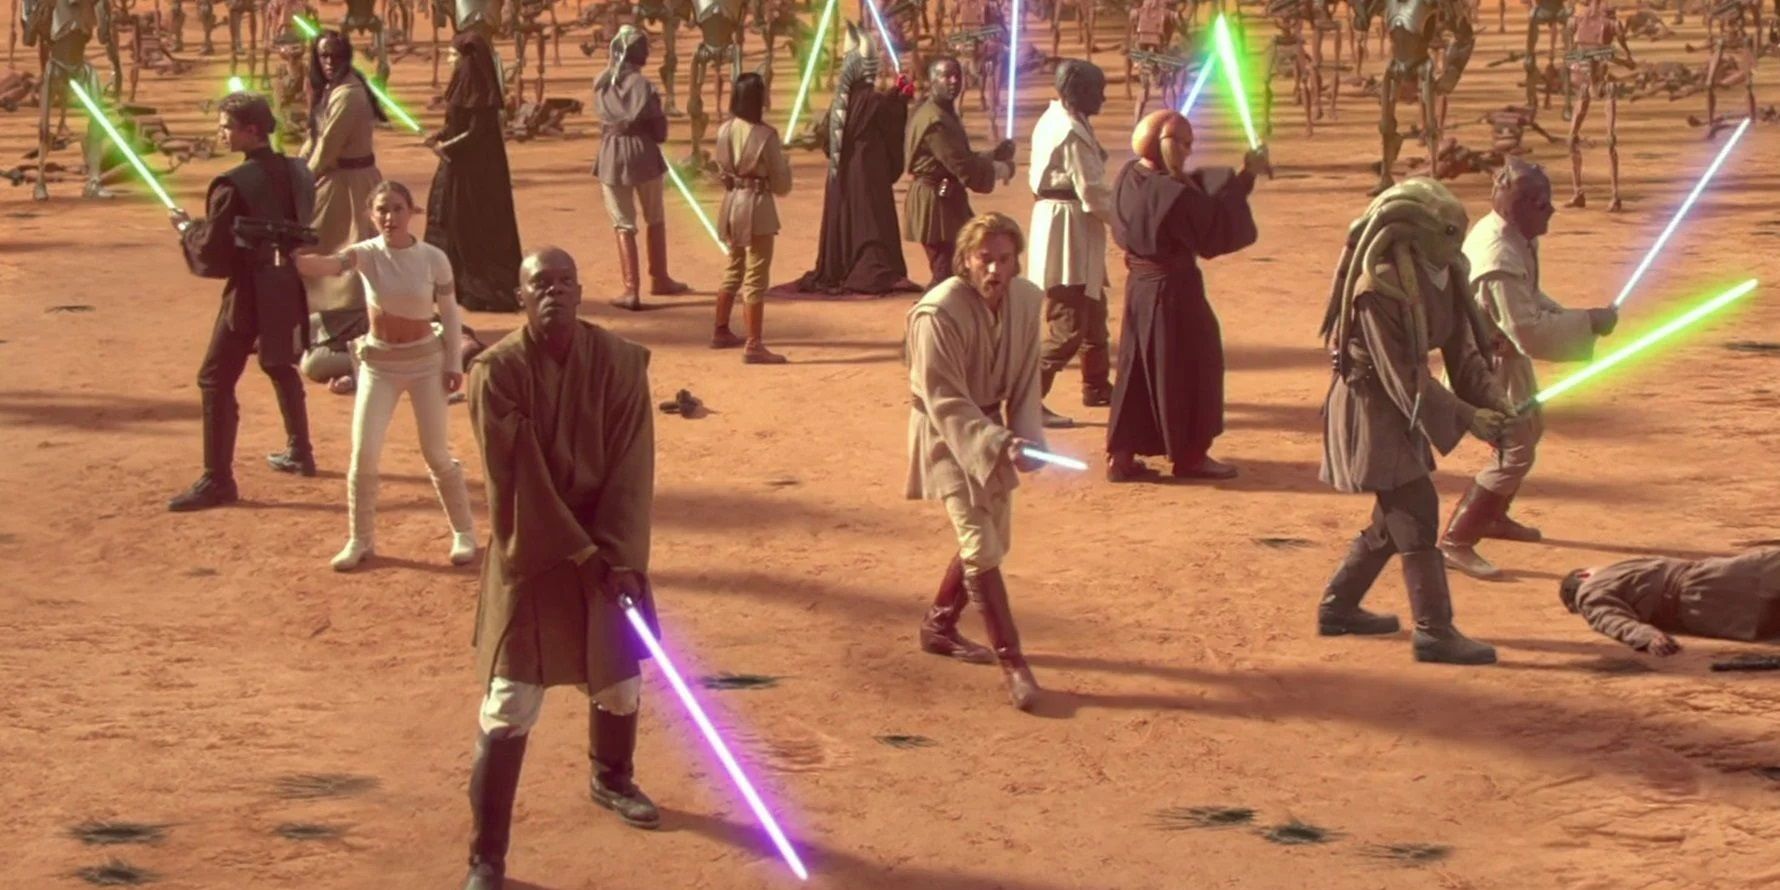 Star Wars Episode II Attack of the Clones jedi with lightsabers in desert arena